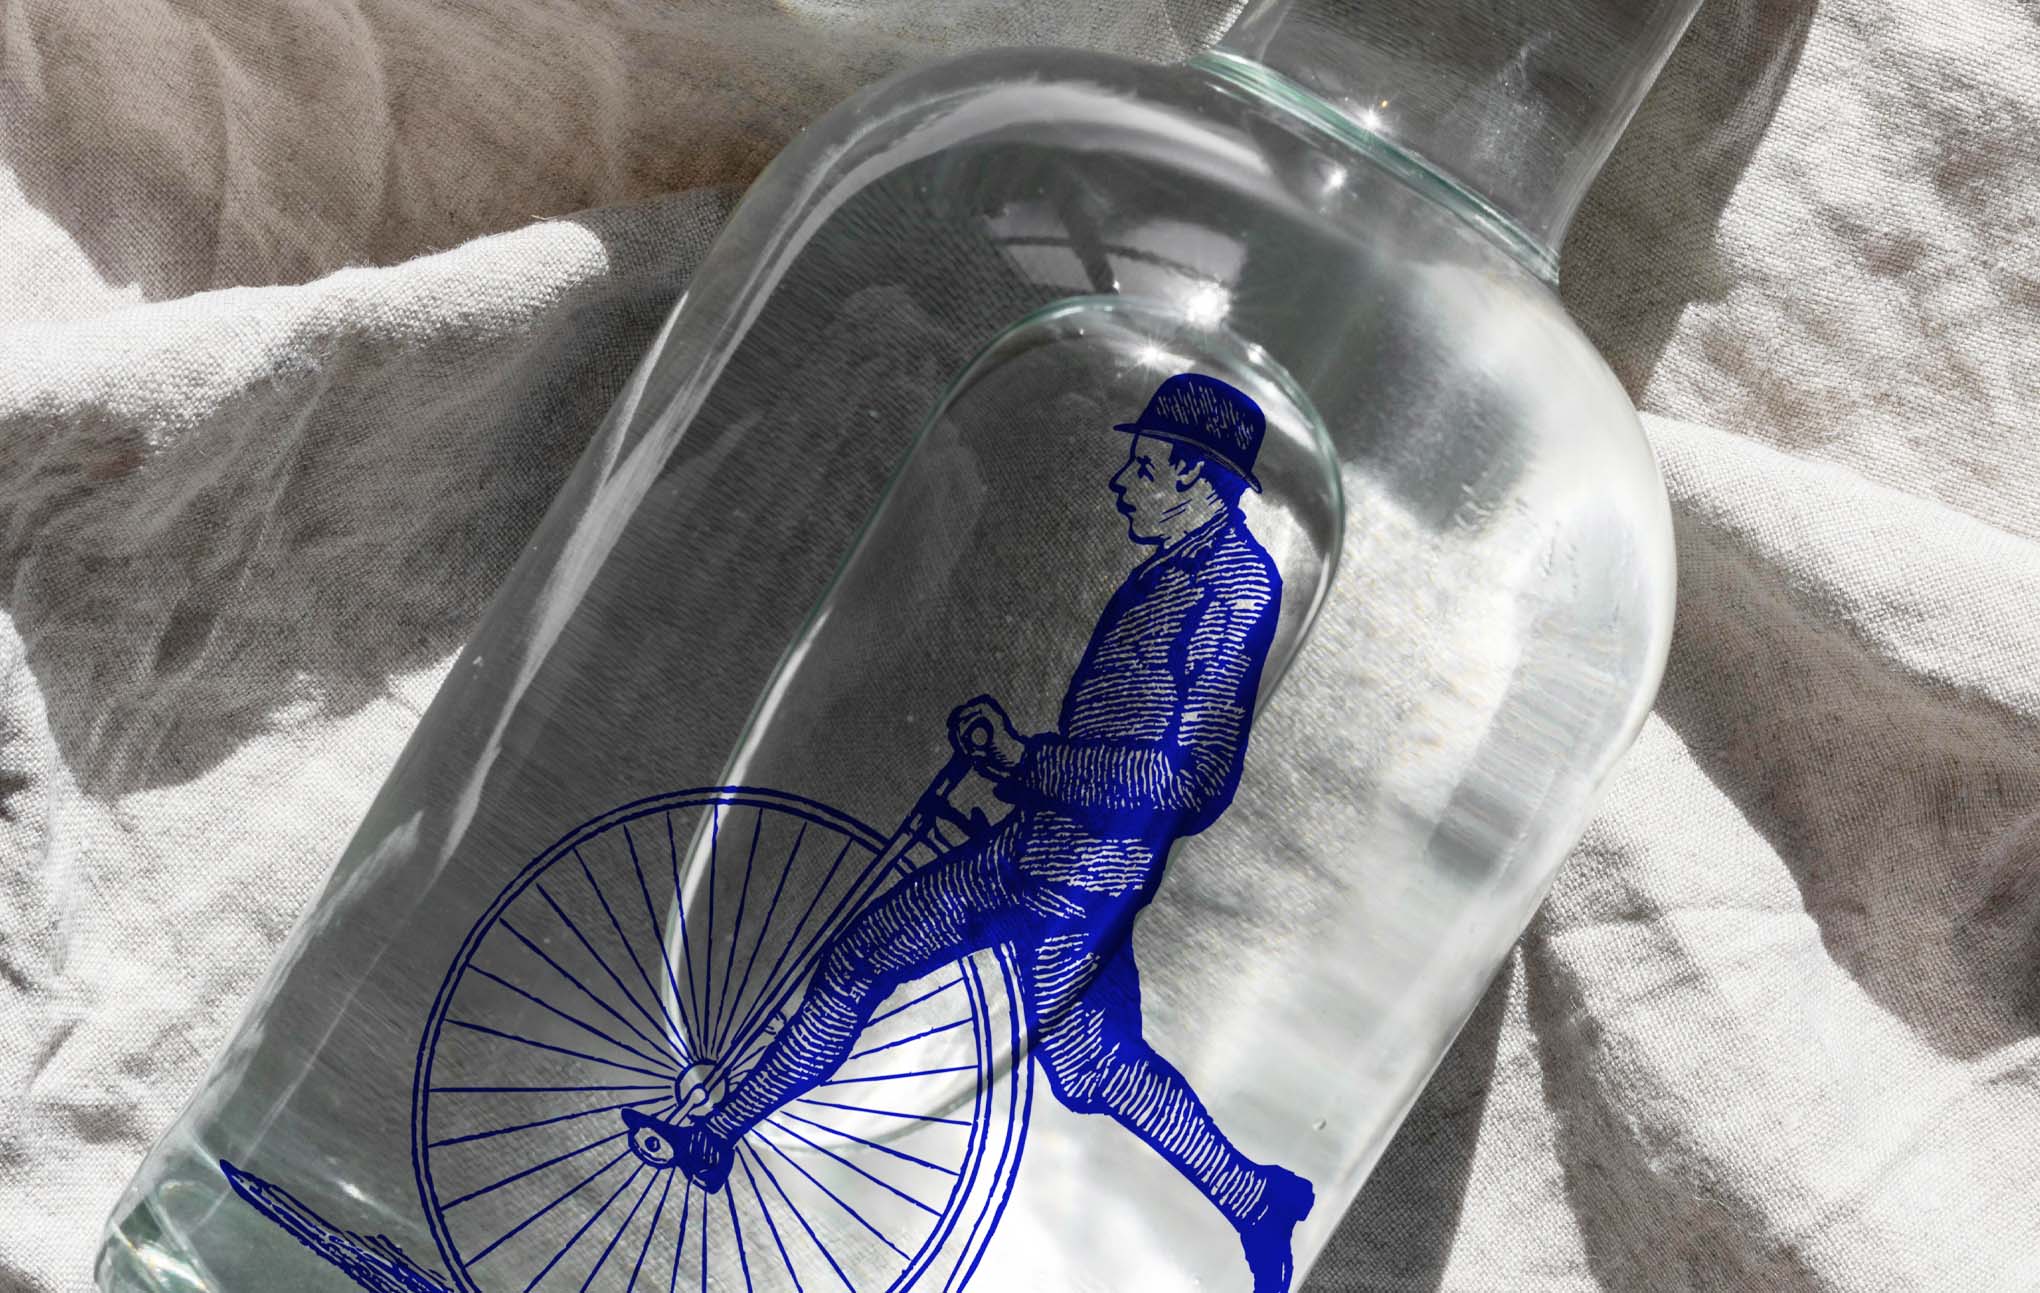 A glass bottle containing a clear spirit lies on a striped cloth. Inside the bottle, a detailed blue silhouette of a man riding an old-fashioned bicycle is displayed, creating a unique and artistic visual piece for